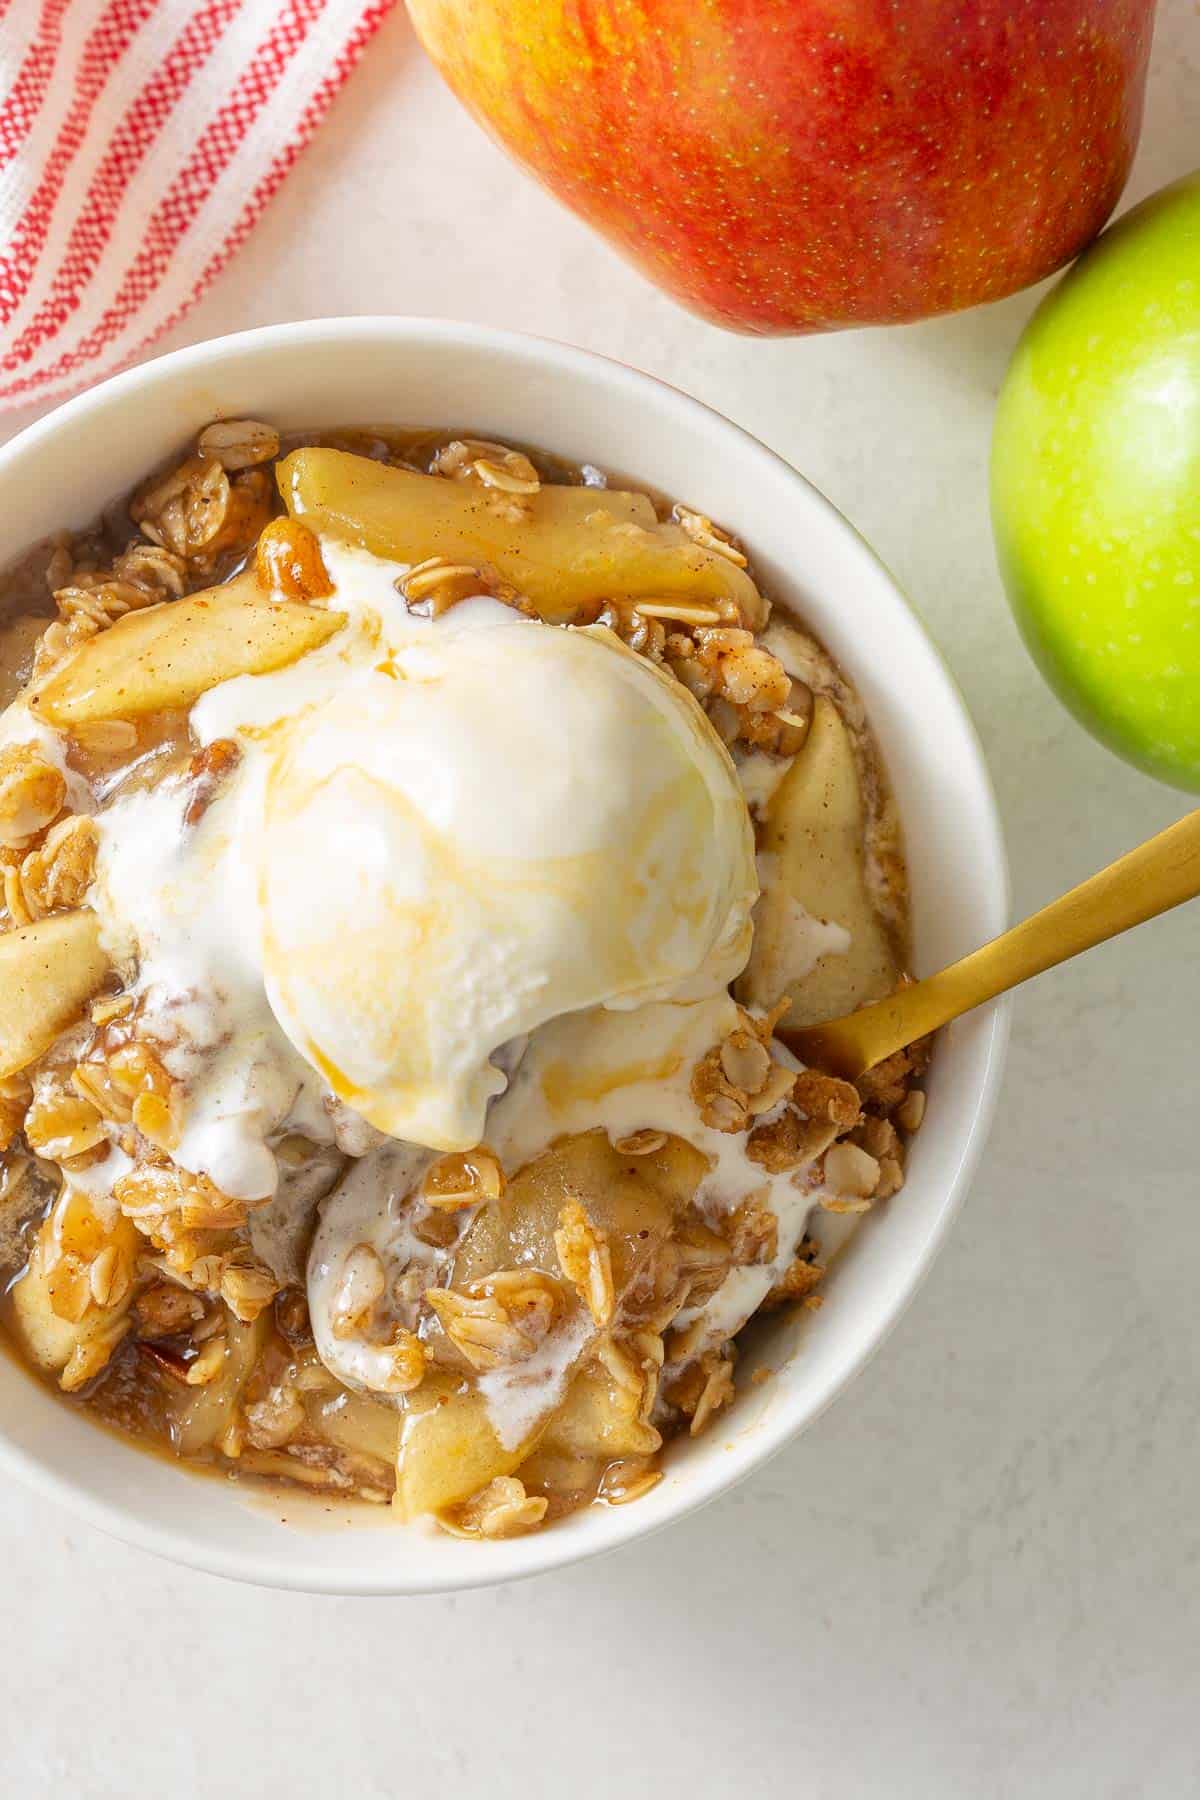 Overhead view of a spoon in a bowl of apple crisp.